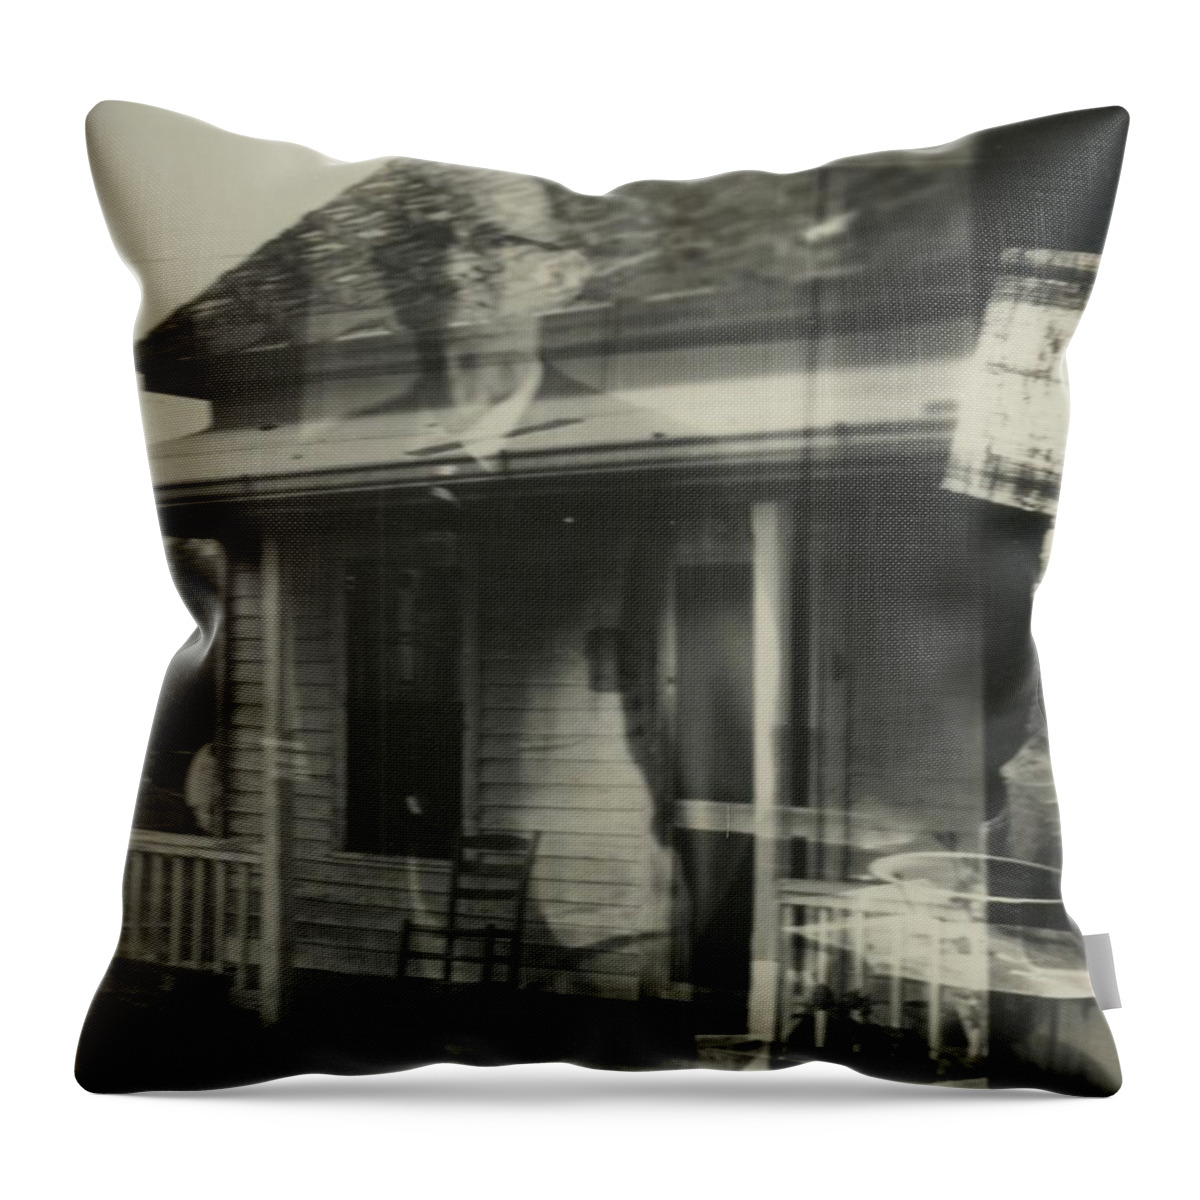 Man Throw Pillow featuring the photograph Memories by Denise F Fulmer